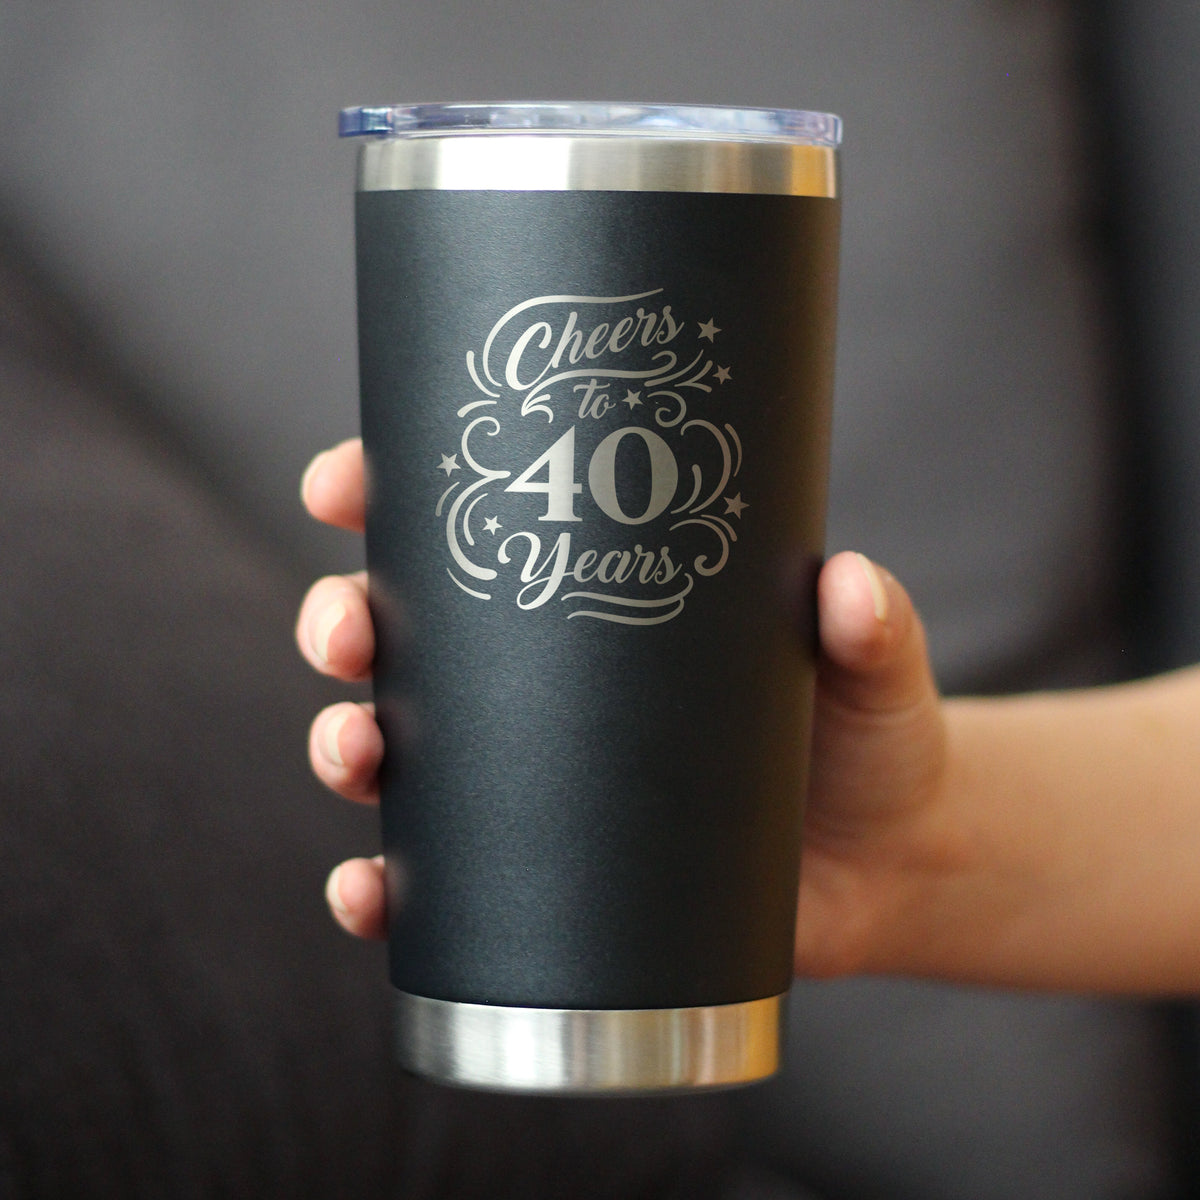 Cheers to 40 Years - Insulated Coffee Tumbler Cup with Sliding Lid - Stainless Steel Insulated Mug - 40th Anniversary Gifts and Party Decor